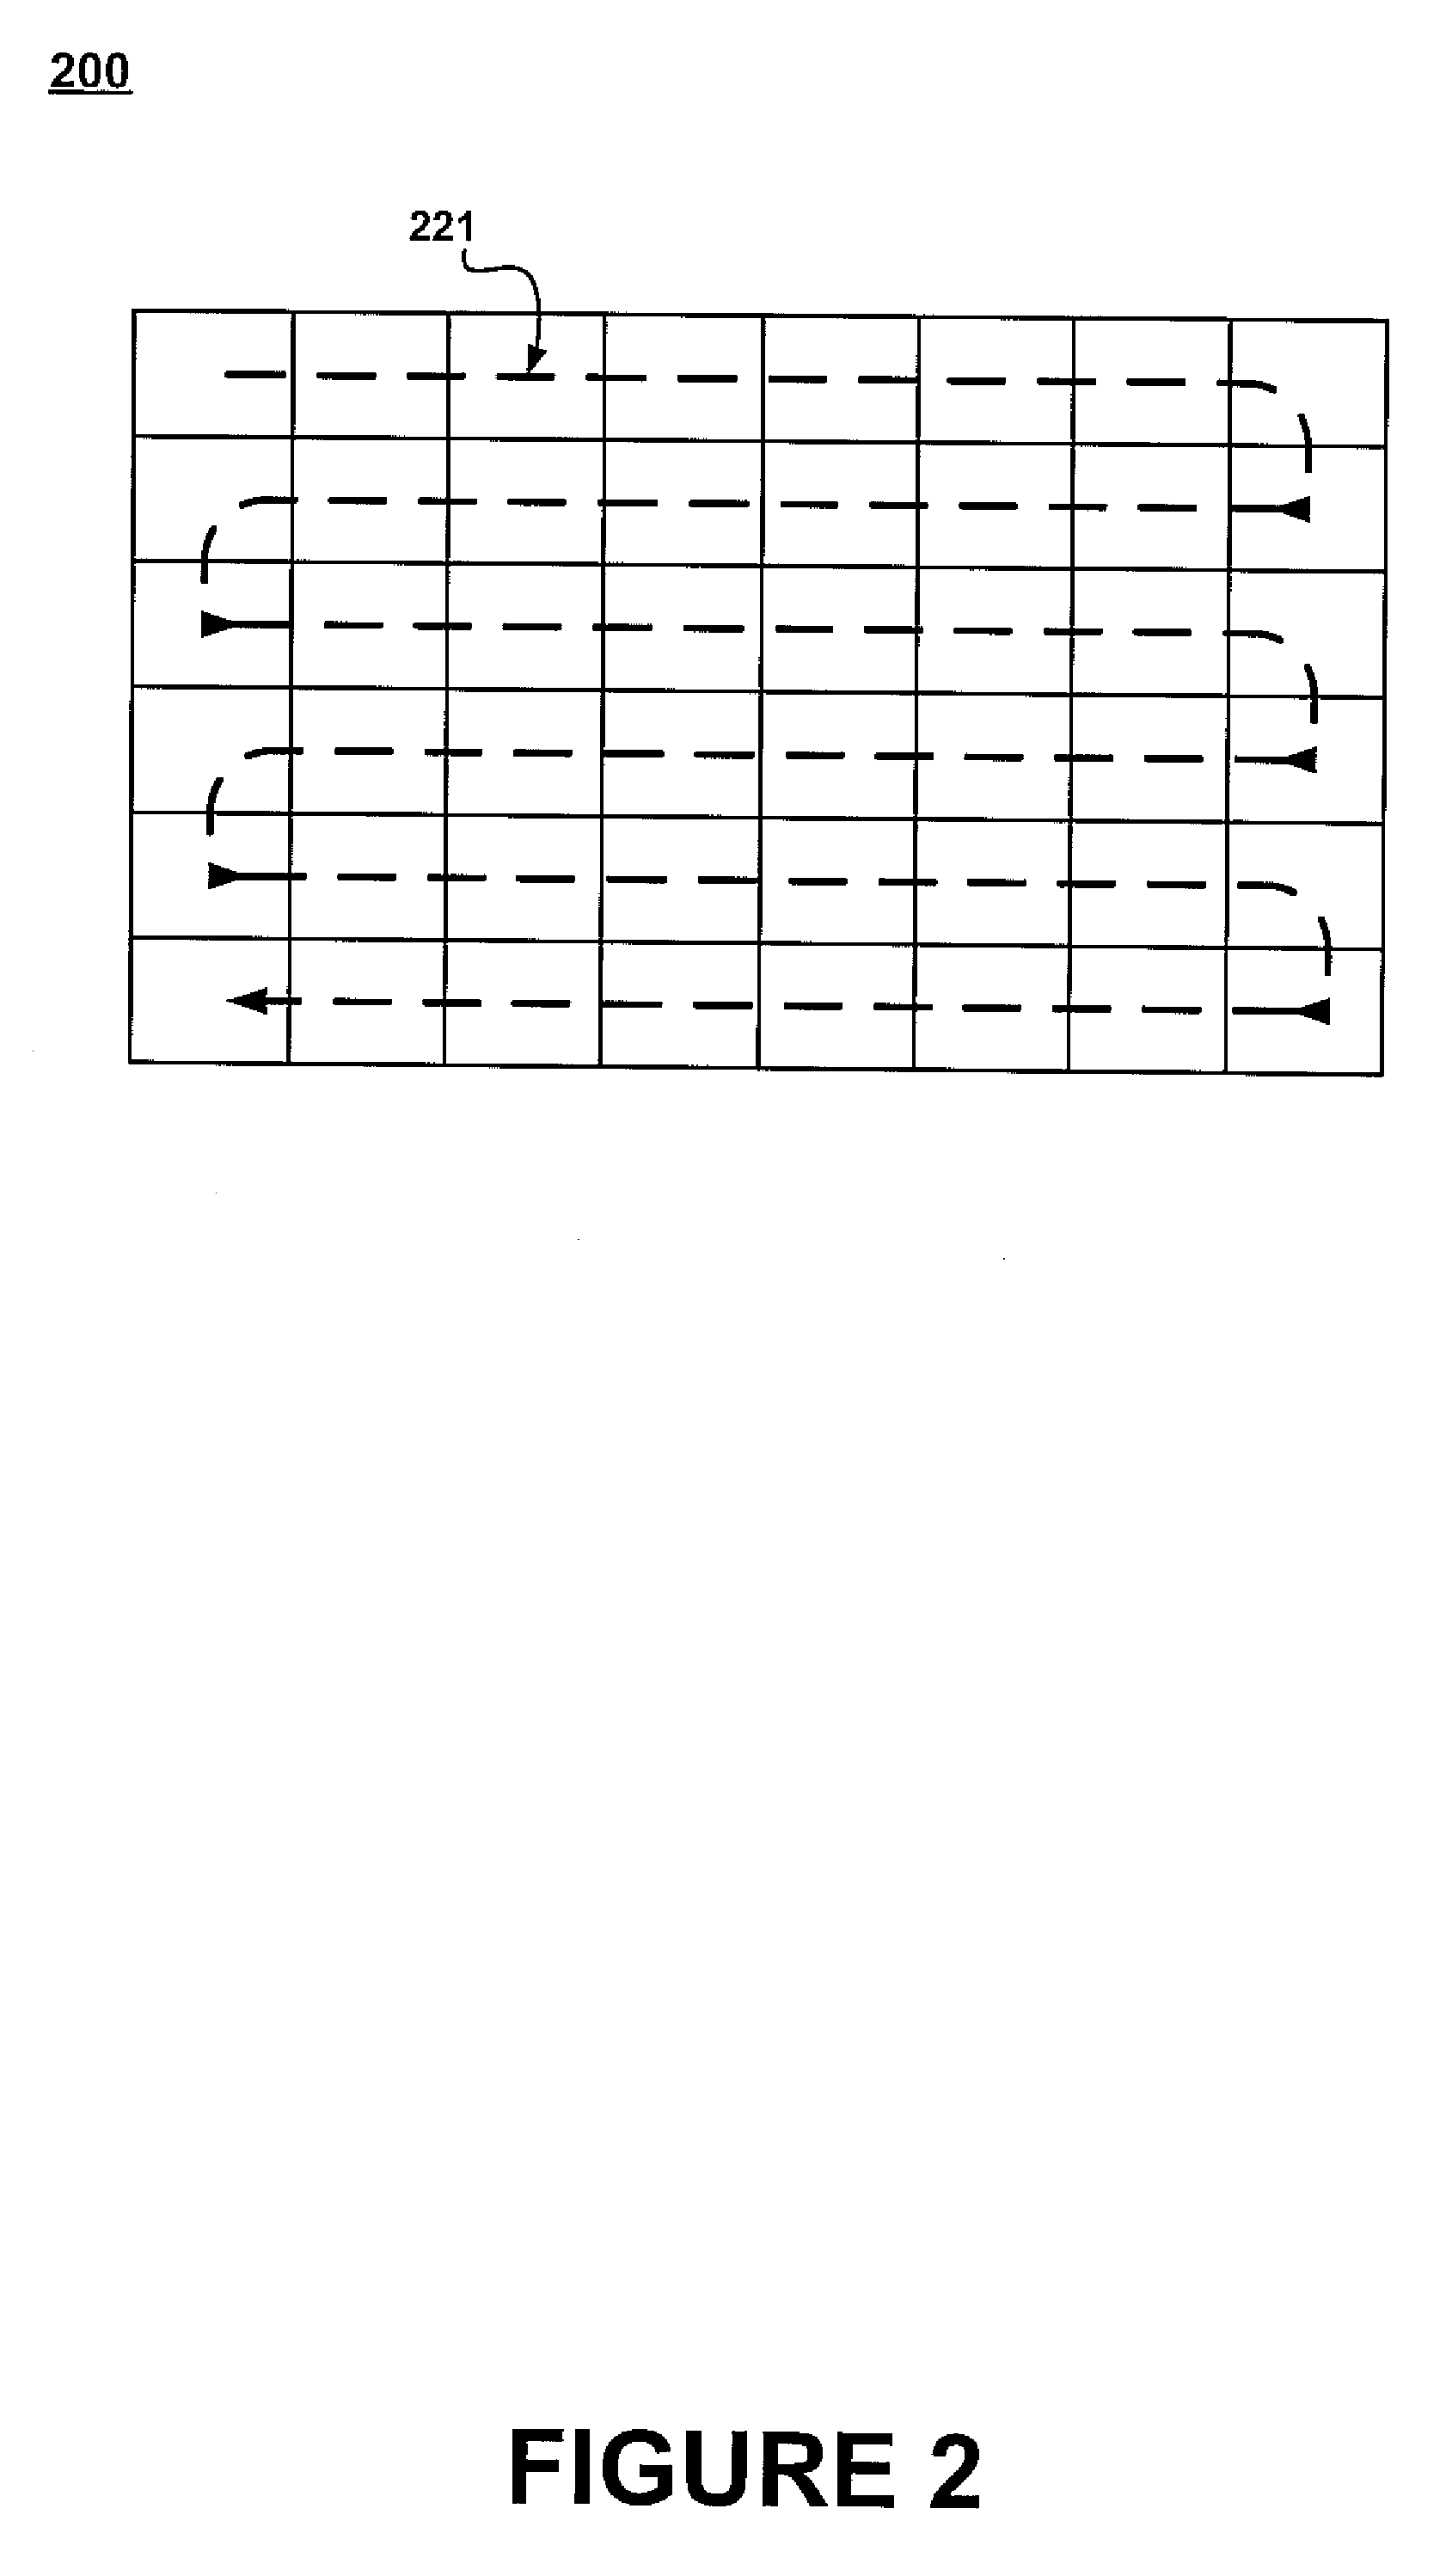 GPU having raster components configured for using nested boustrophedonic patterns to traverse screen areas